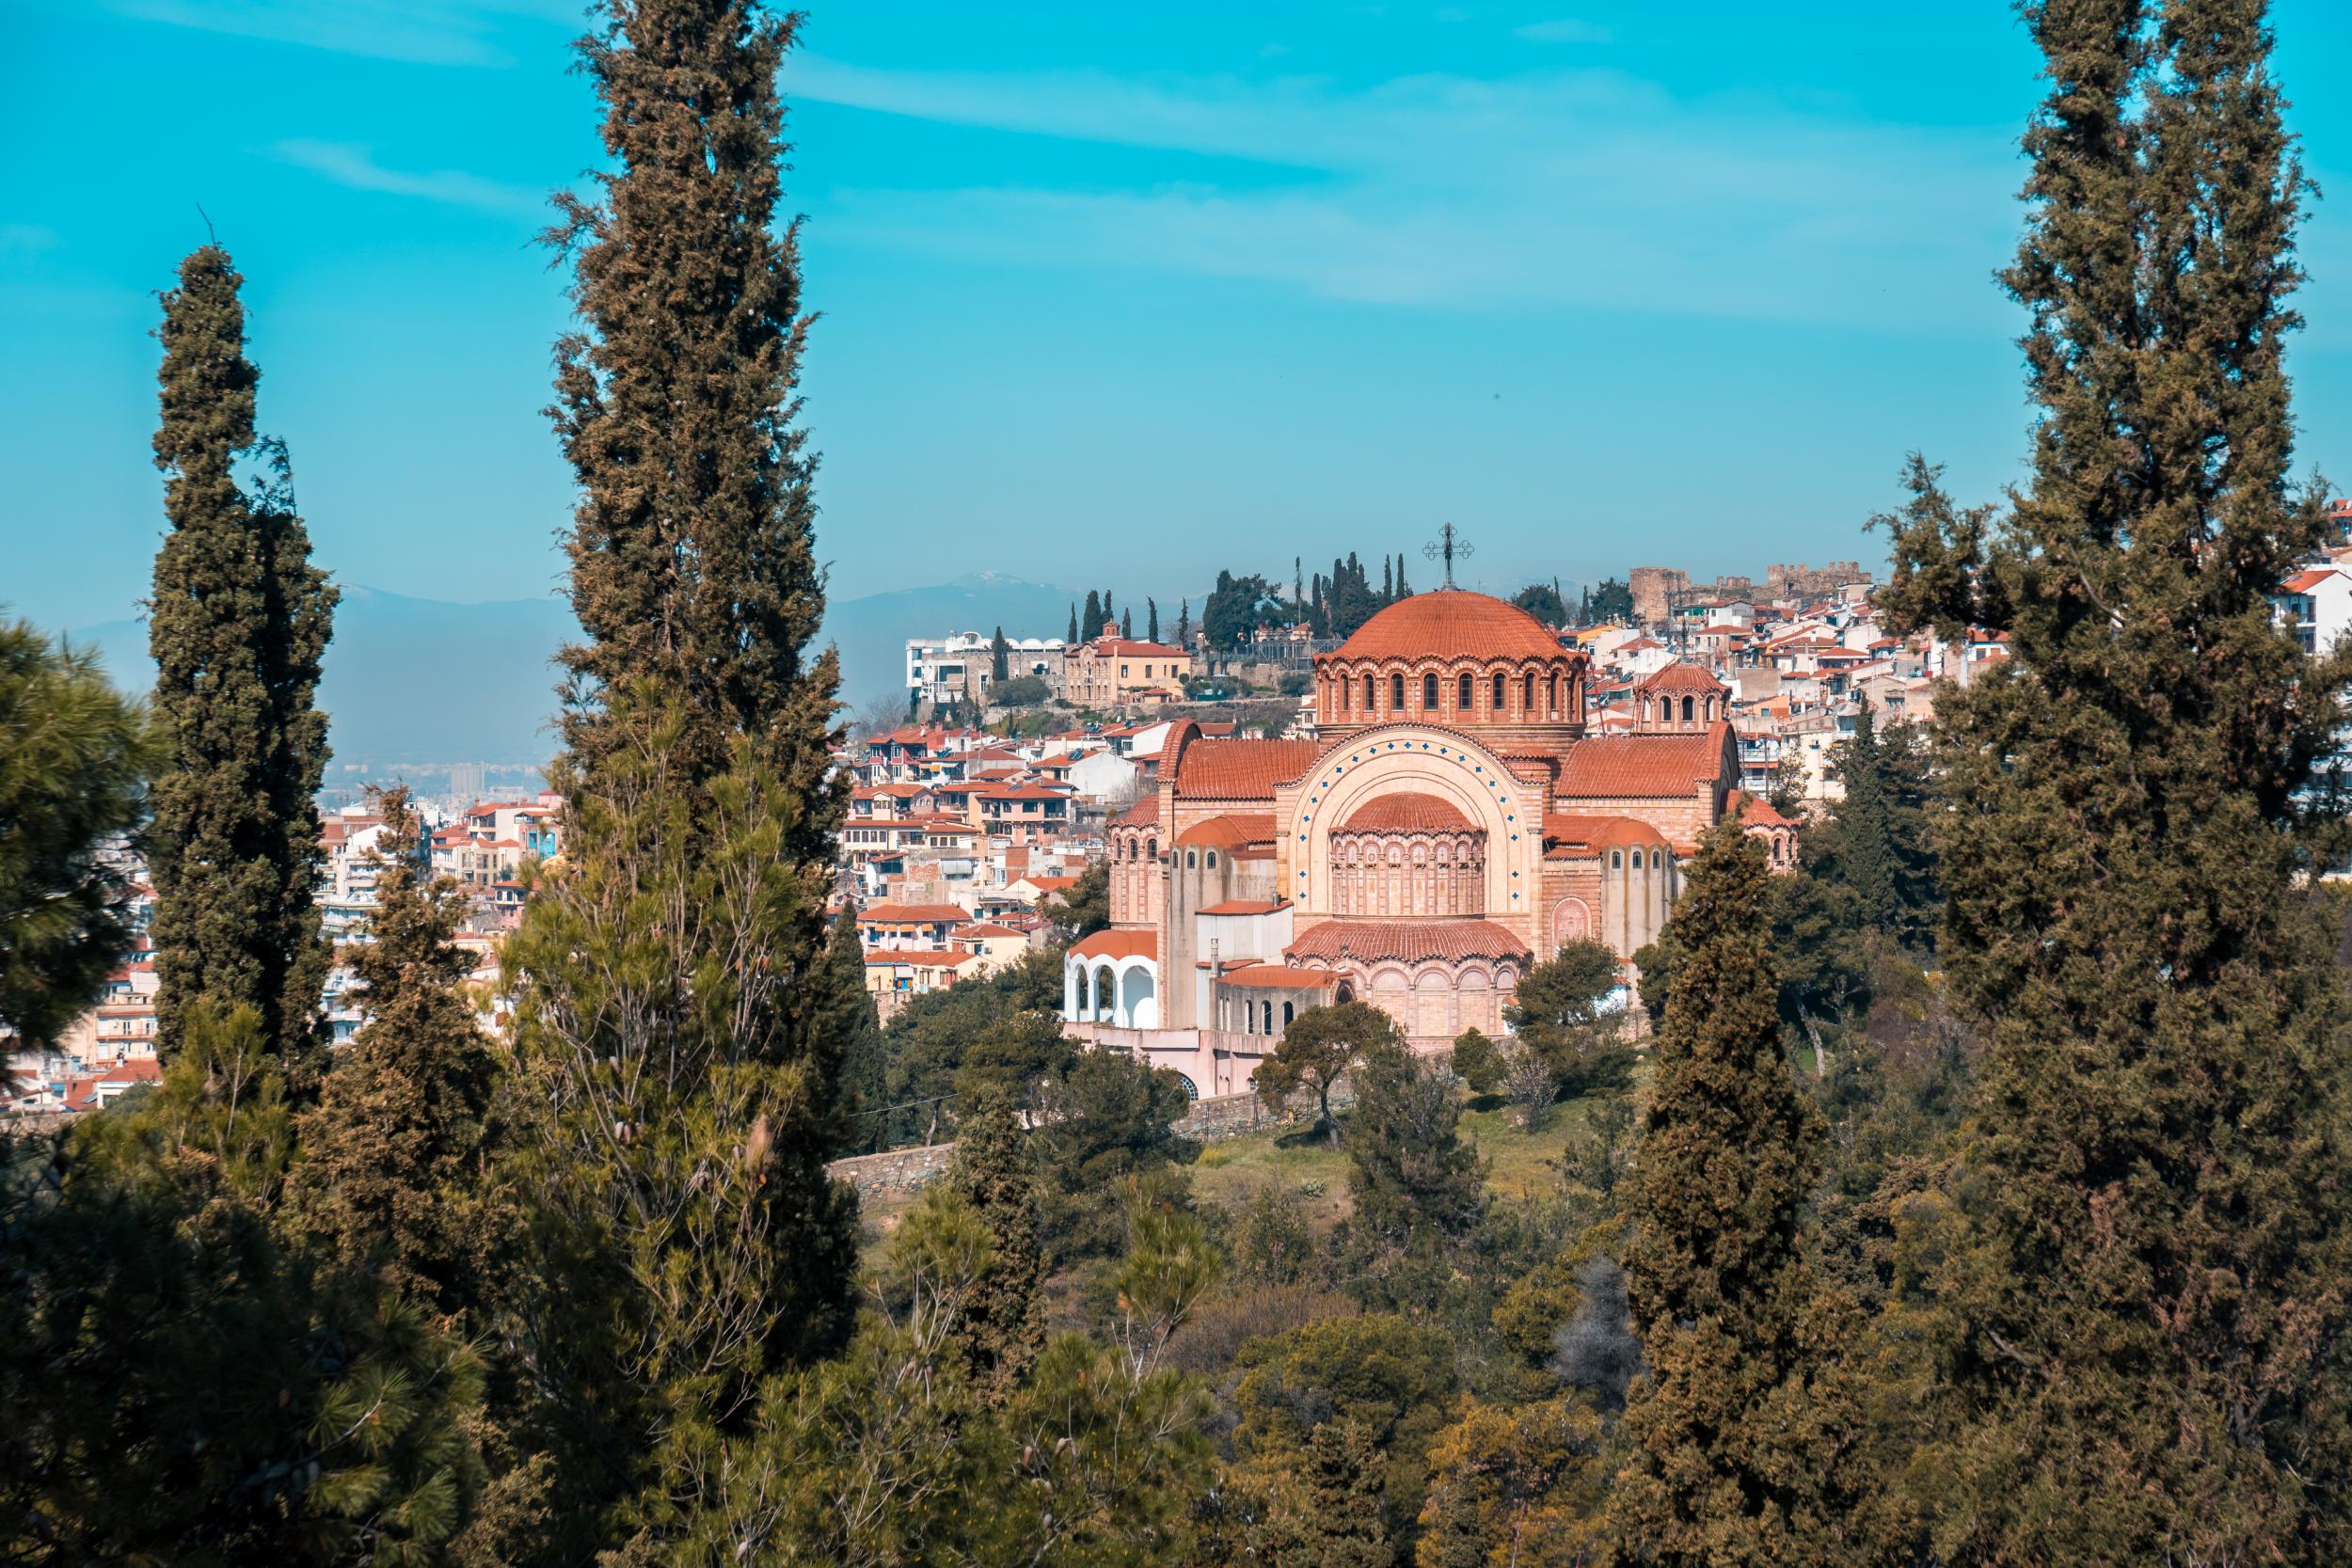 Thessaloniki’s ancient history and beautiful coastline make an appealing combination